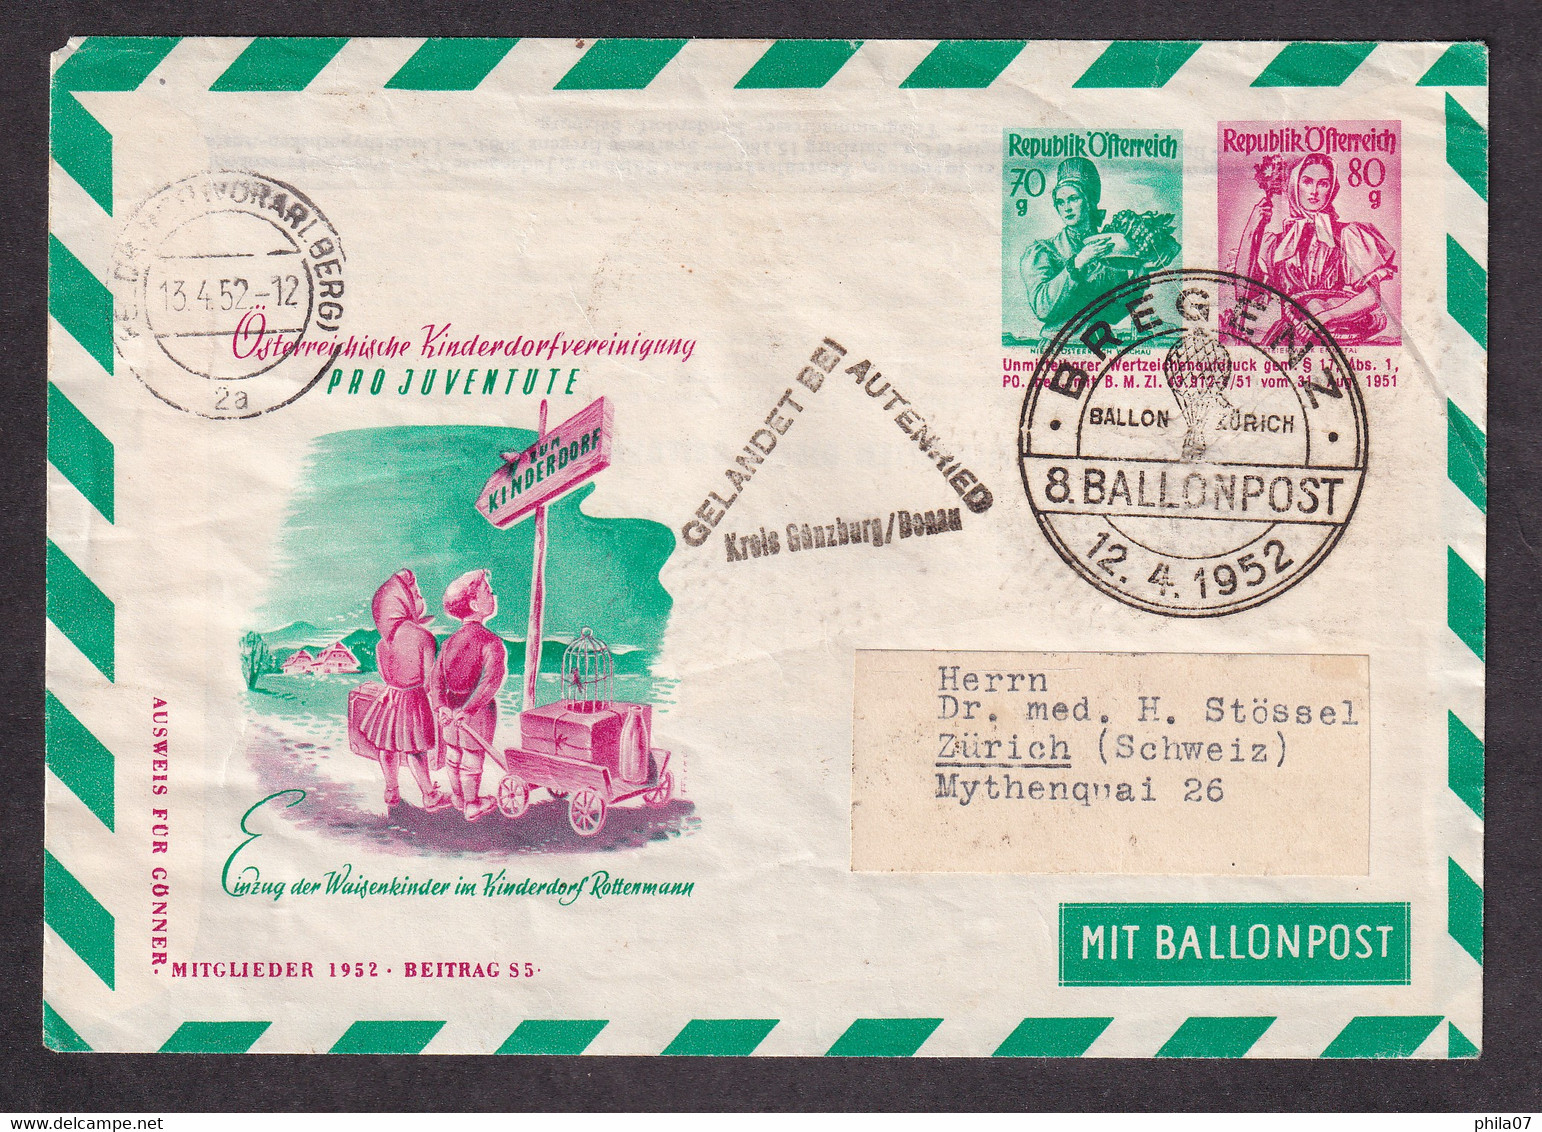 AUSTRIA - 8 Ballonpost, Envelope With Imprinted Value, Sent From Bregenza To Switzerland 12.04. 1952.  / 2 Scan - Ballons